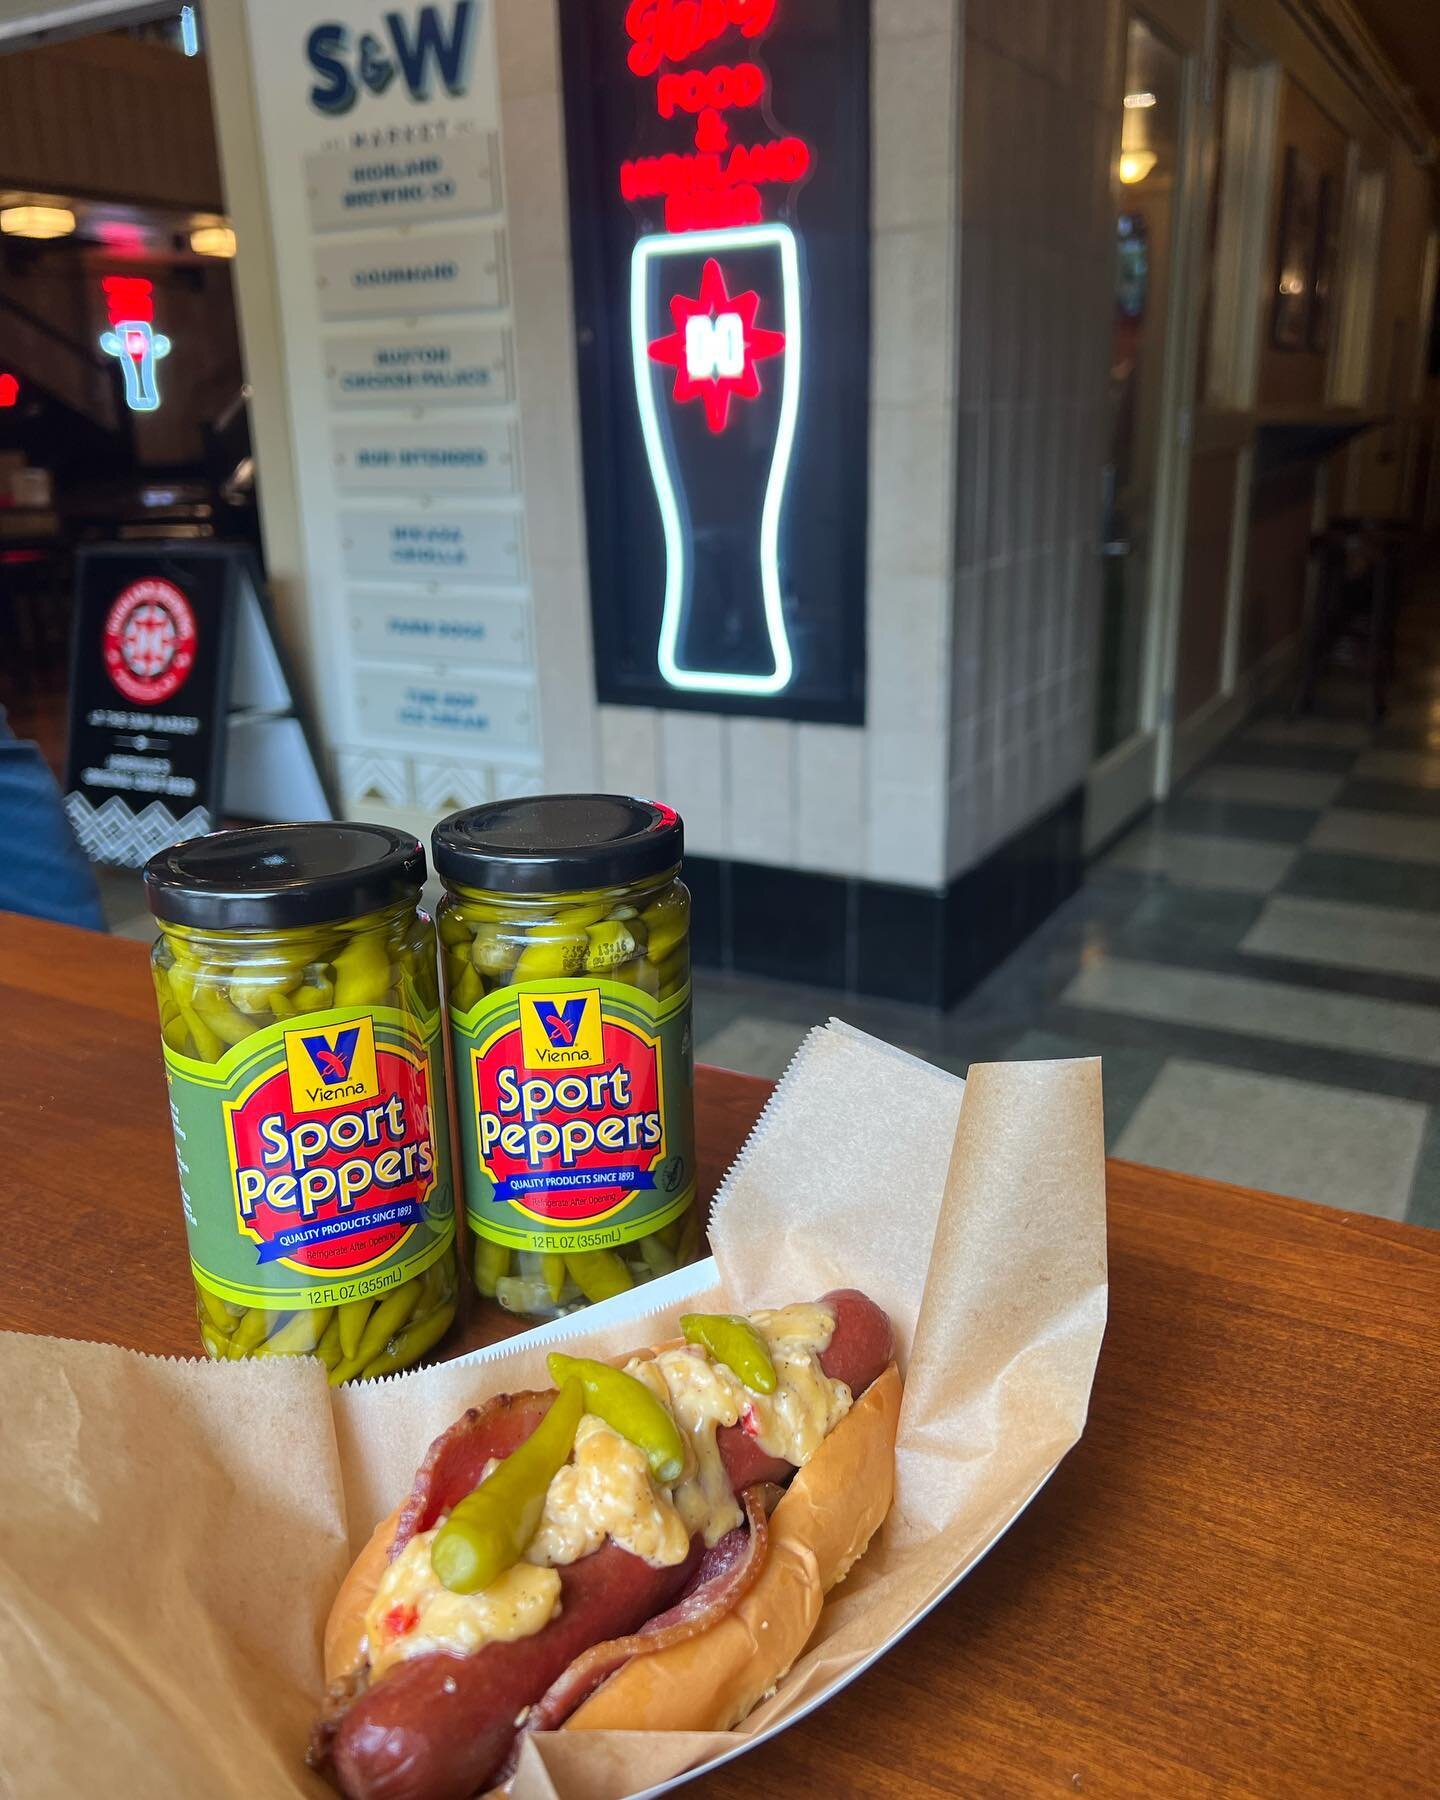 We put the Mayo in Cinco de Mayo 😜 this weekend come try our market dog topped with house-made creamy pimento cheese and @viennabeef sport peppers, nestled in a crispy bed of bacon. 
&bull; 
Market side: potato salad!
&bull;

#yumyumyum #828isgreat 